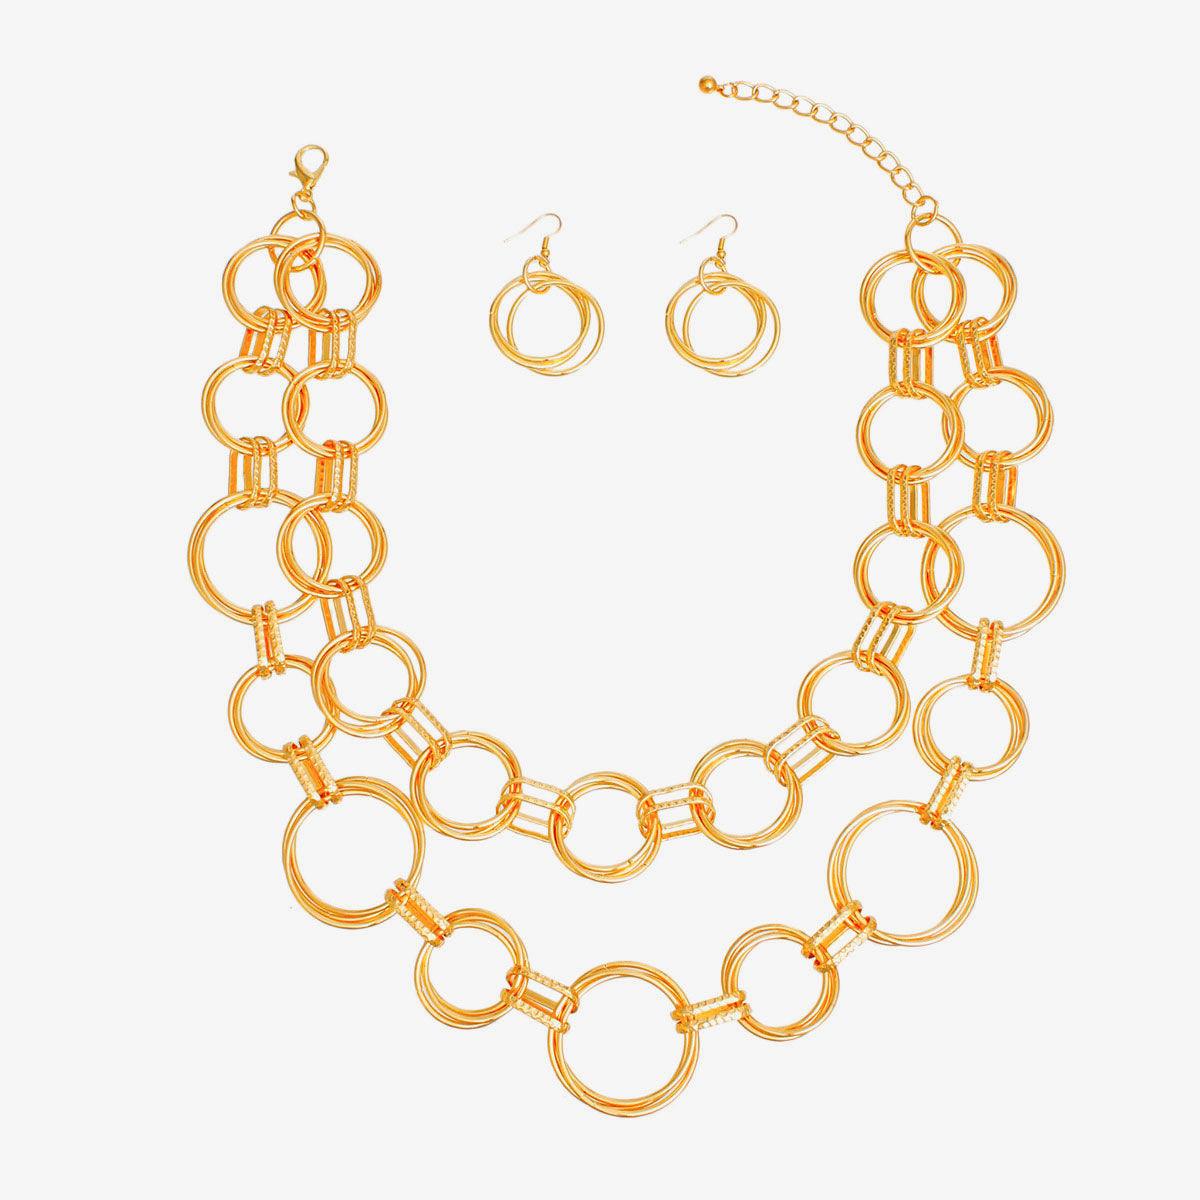 Style a Simple Outfit with a Gold Linked Rings Chain Set - Timeless Chic